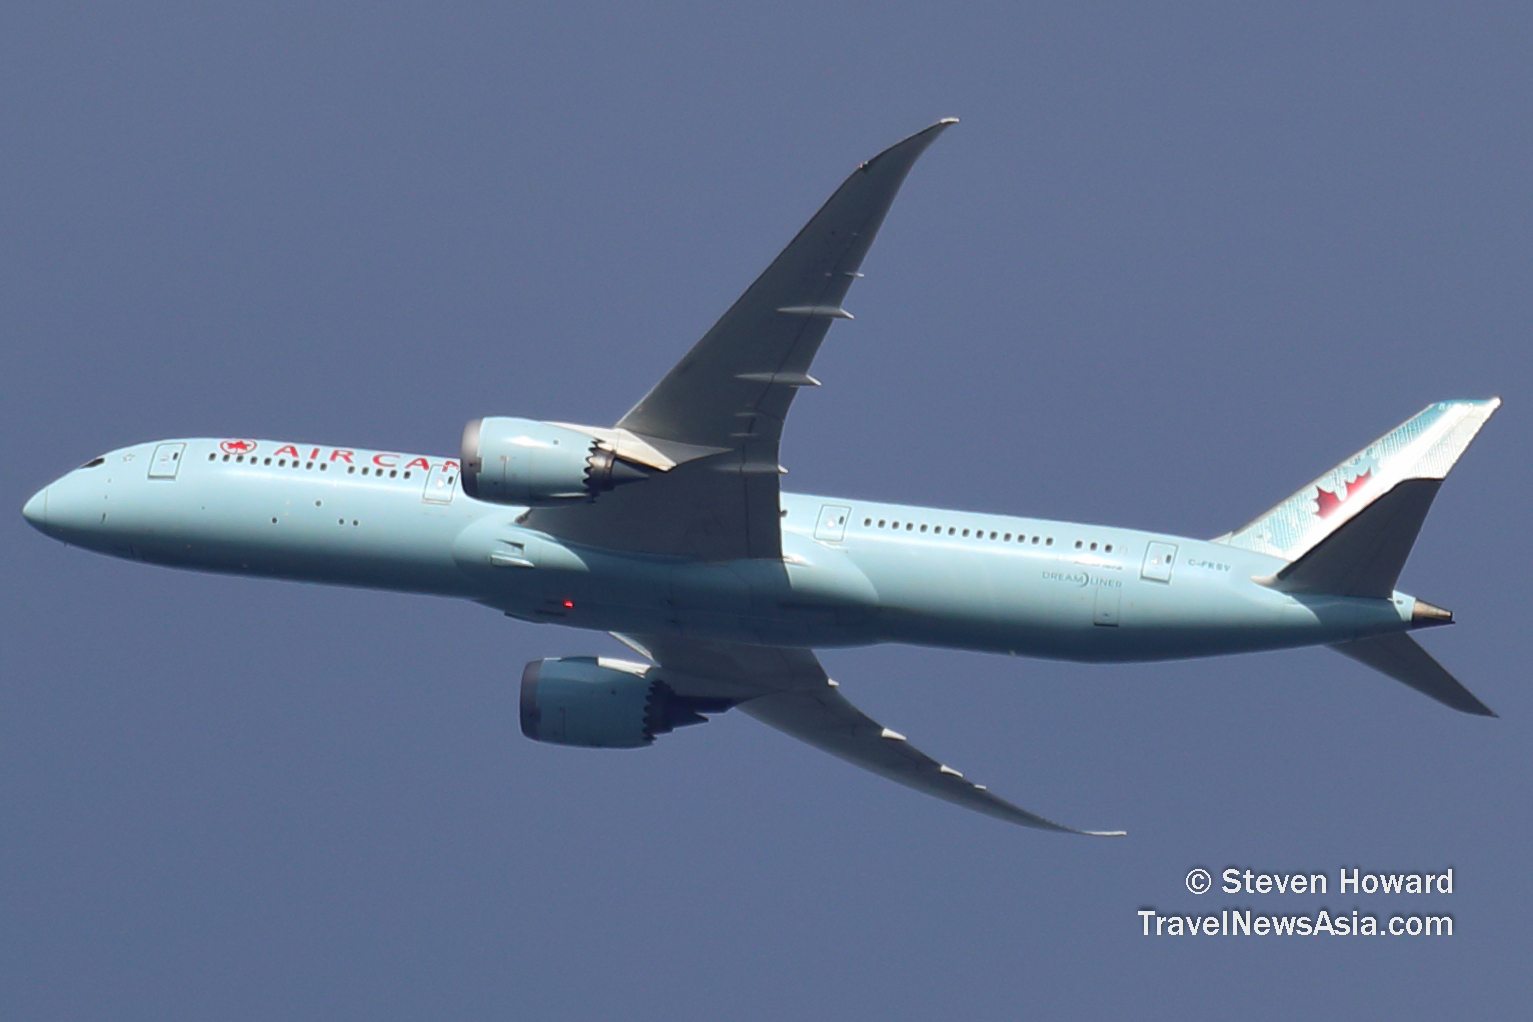 Air Canada B787-9 reg: C-FKSV flying from LHR to YYZ. Picture by Steven Howard of TravelNewsAsia.com Click to enlarge.